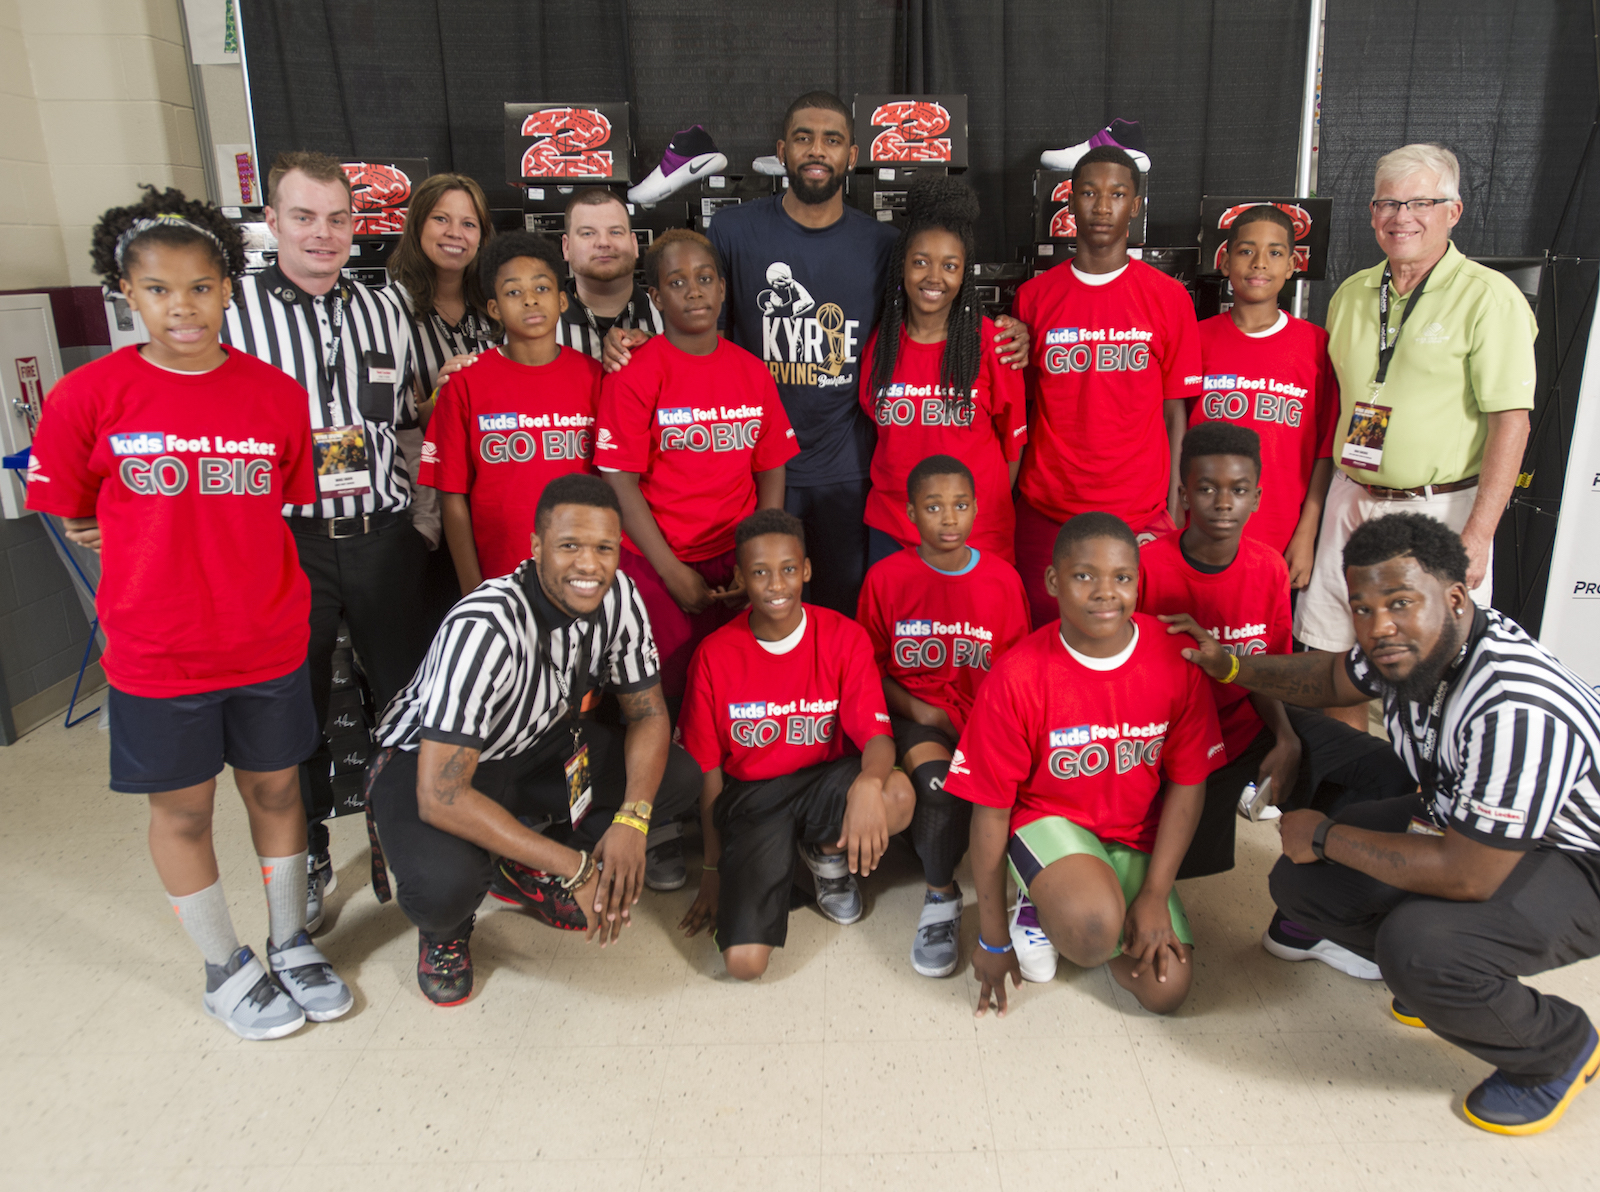 Cleveland Cavaliers star Kyrie Irving, center, back row, poses with members of the Boys & Girls Clubs of Cleveland at his basketball camp Saturday, July 9, 2016, in Independence, Ohio. Kids Foot Locker donated 190 pairs of sneakers to BGCC, to match Irving's 190 points scored during the NBA championship series.  (Phil Long/AP Images for Kids Foot Locker)